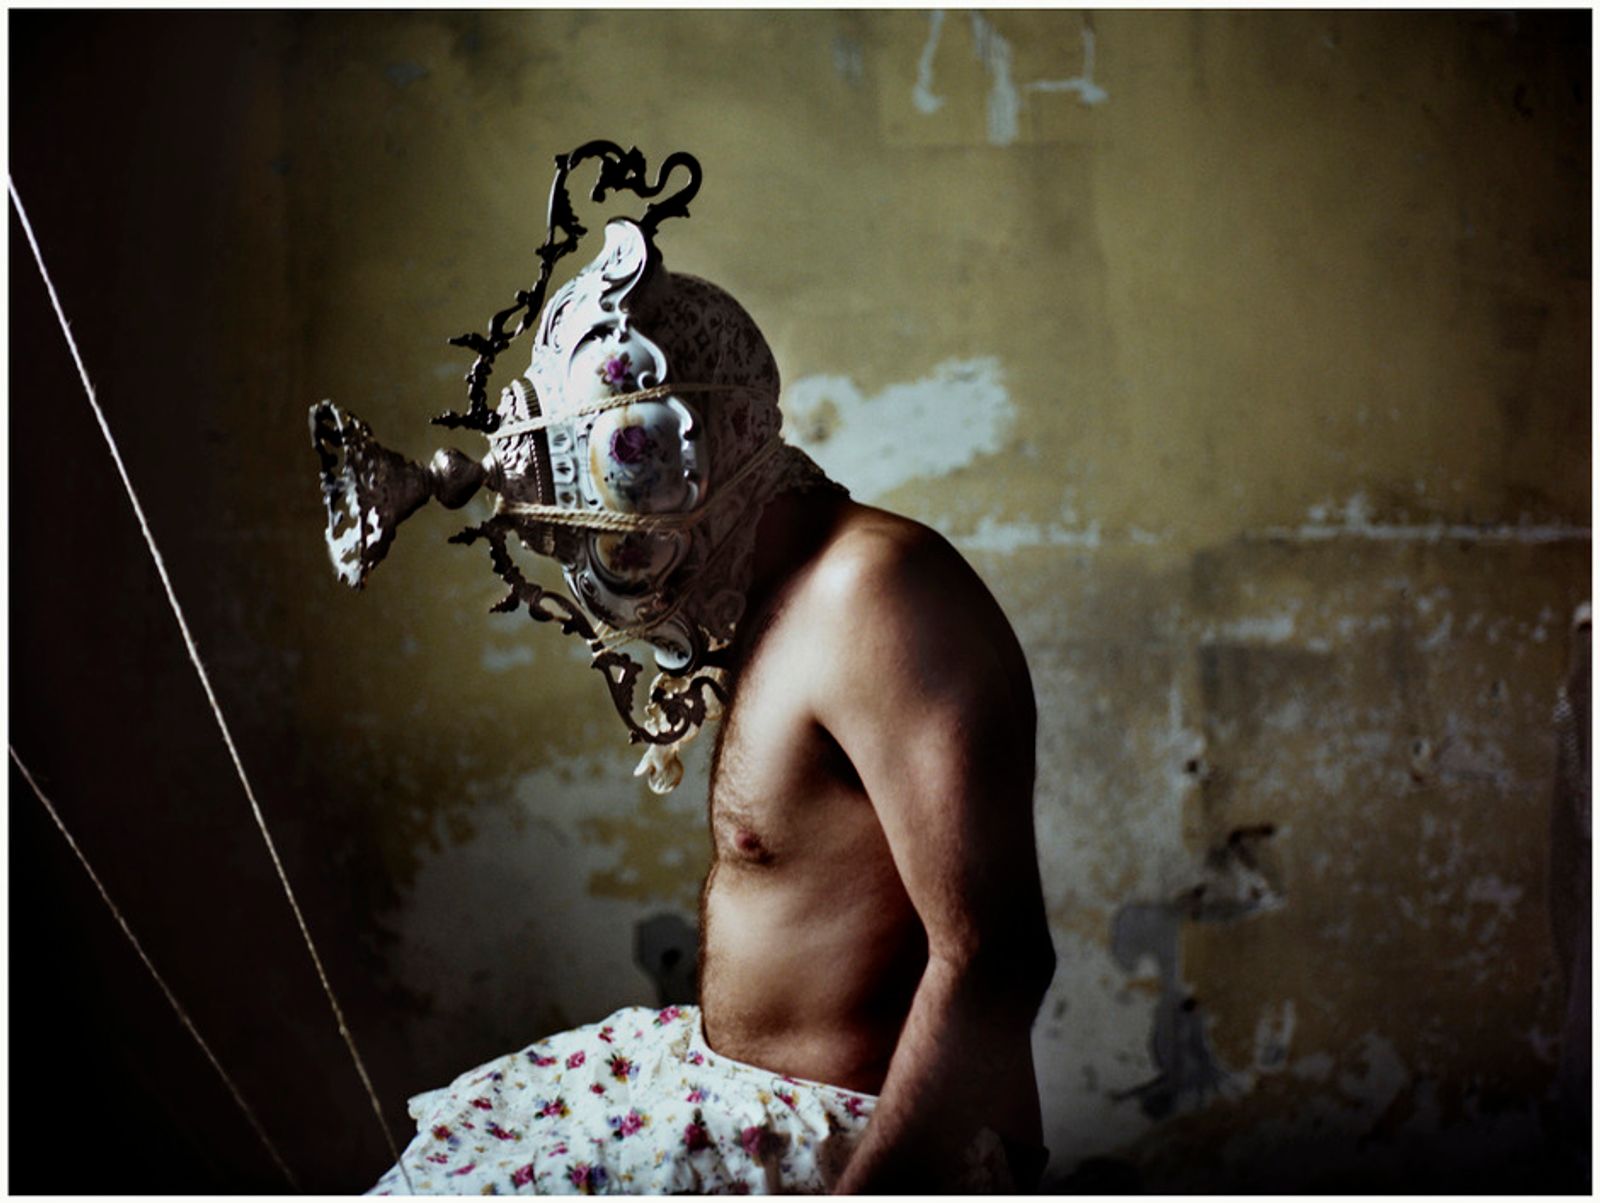 © Alfonso Almendros - Image from the Family Reflections photography project